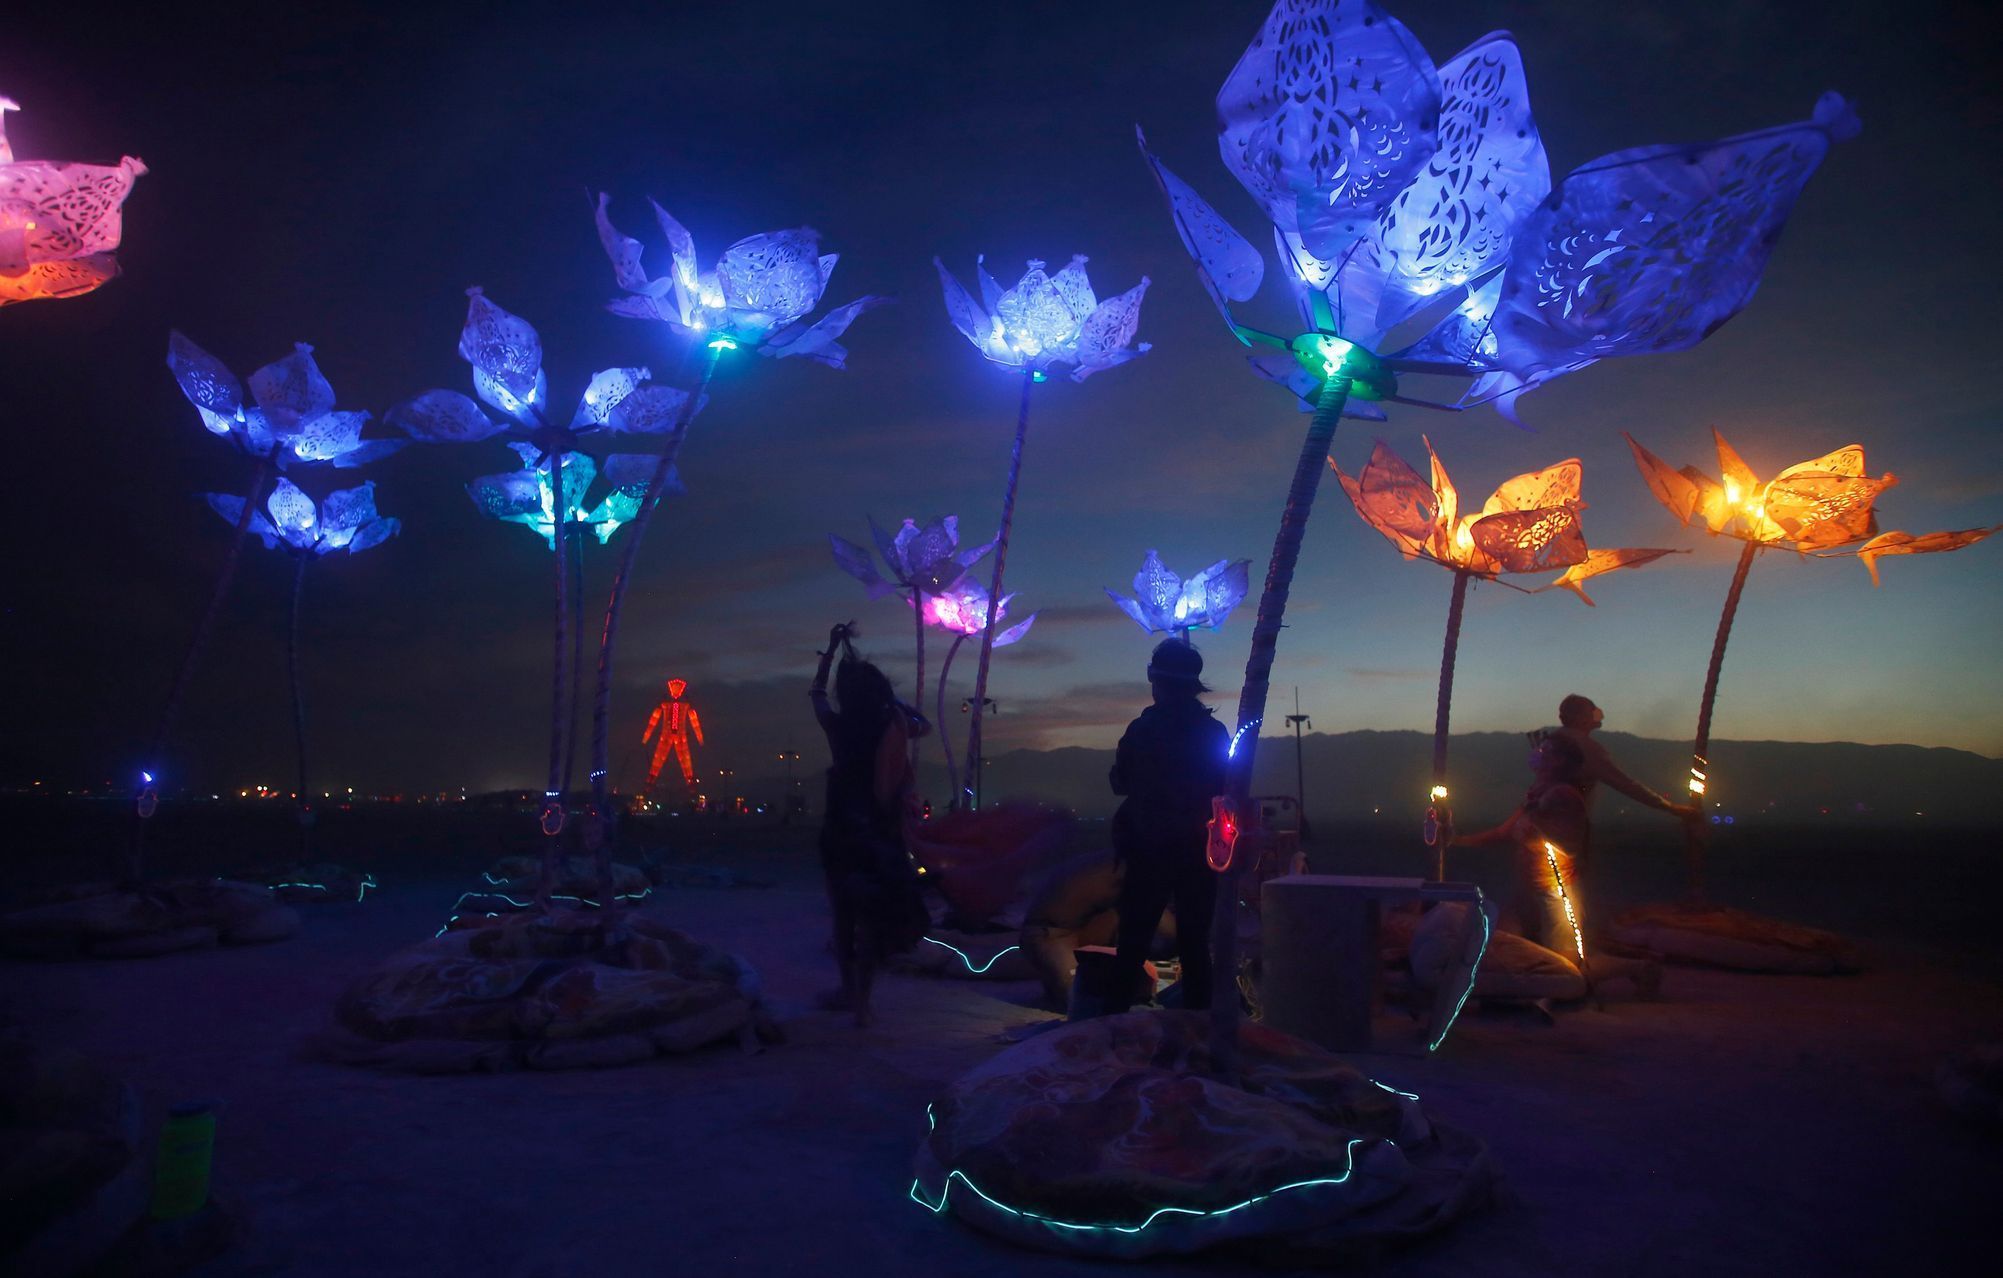 The art installation Pulse &amp; Bloom is seen at nigth during the Burning Man 2014 &quot;Caravansary&quot; arts and music festival in the Black Rock Desert of Nevada